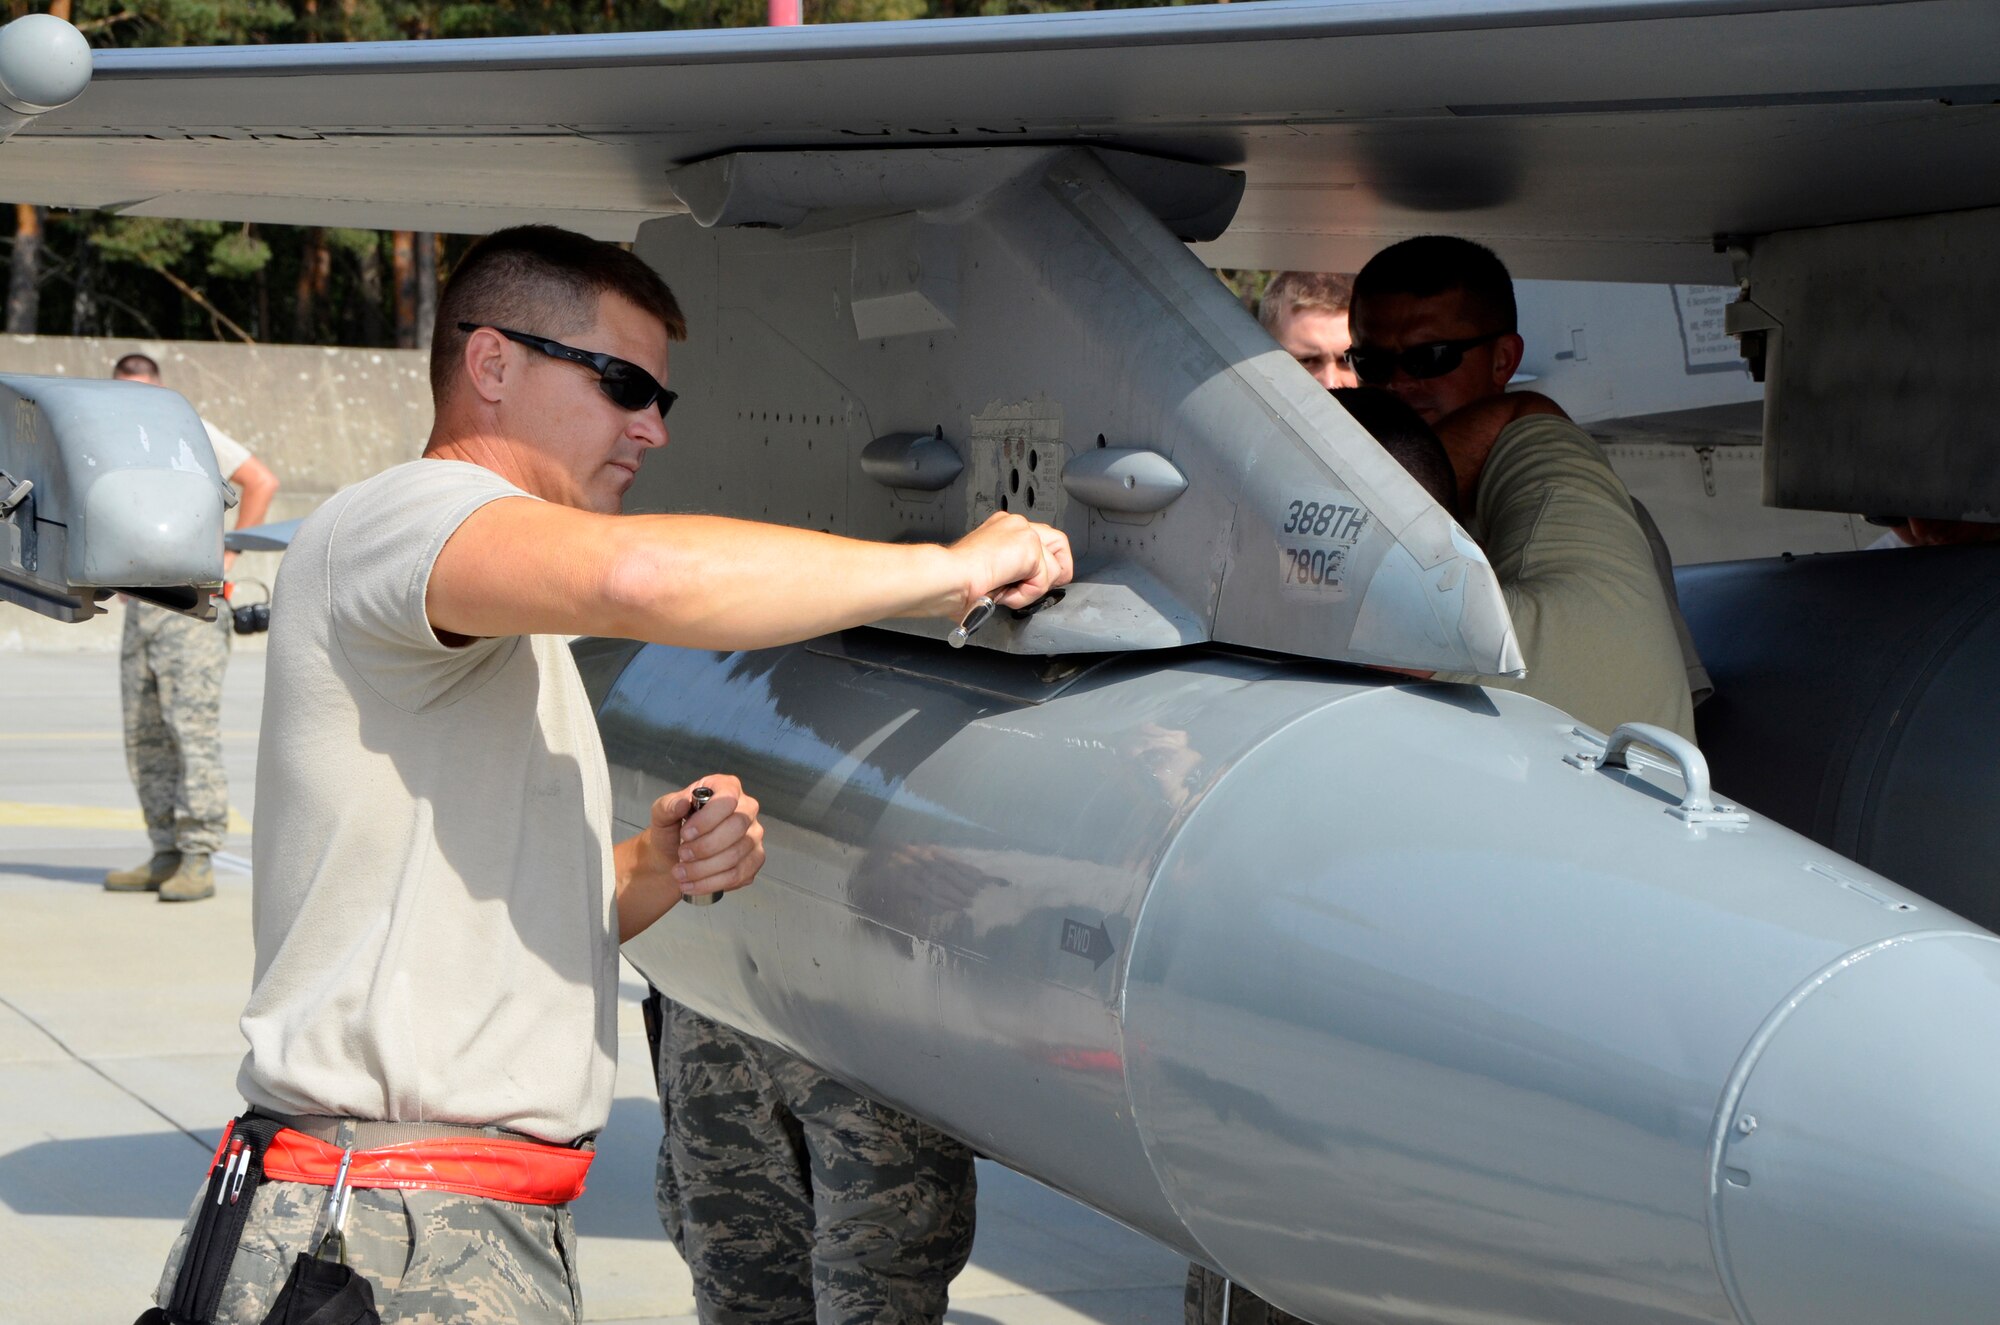 Master Sgt. Scott Meyer, 114th Aircraft Maintenance Squadron crew chief, removes a travel pod from an F-16 Fighting Falcon after arrival at Lask Air Base, Poland, Sept. 3, 2016. The 114th Fighter Wing deployed more than 100 personnel in support of Aviation Detachment 16-4, a bilateral training exercise between the U.S. and Polish forces. The 114 FW was able to train alongside Polish allies in a variety of missions to include, close air support, air to air and air to ground. (U.S. Air National Guard photo by Capt. Amy Rittberger)